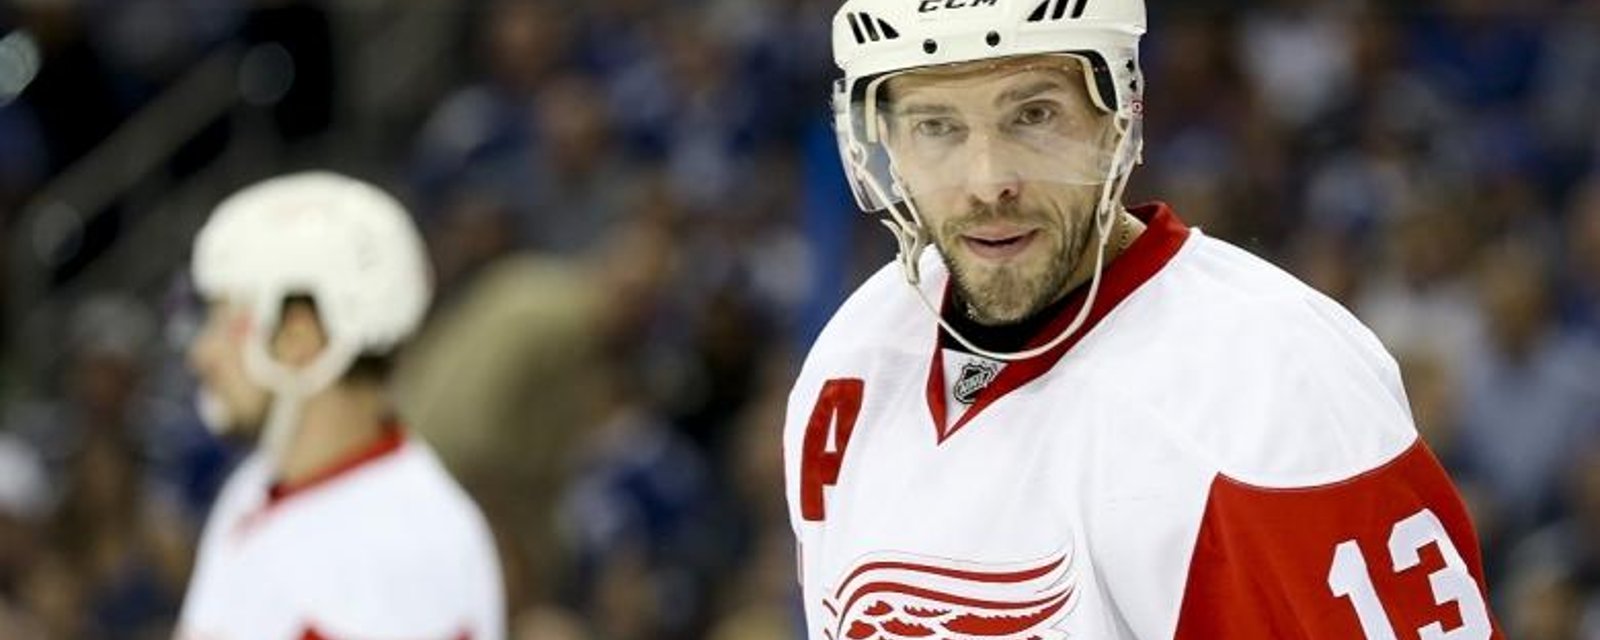 Breaking: Pavel Datsyuk appears to have made his decision and it's a shocker.